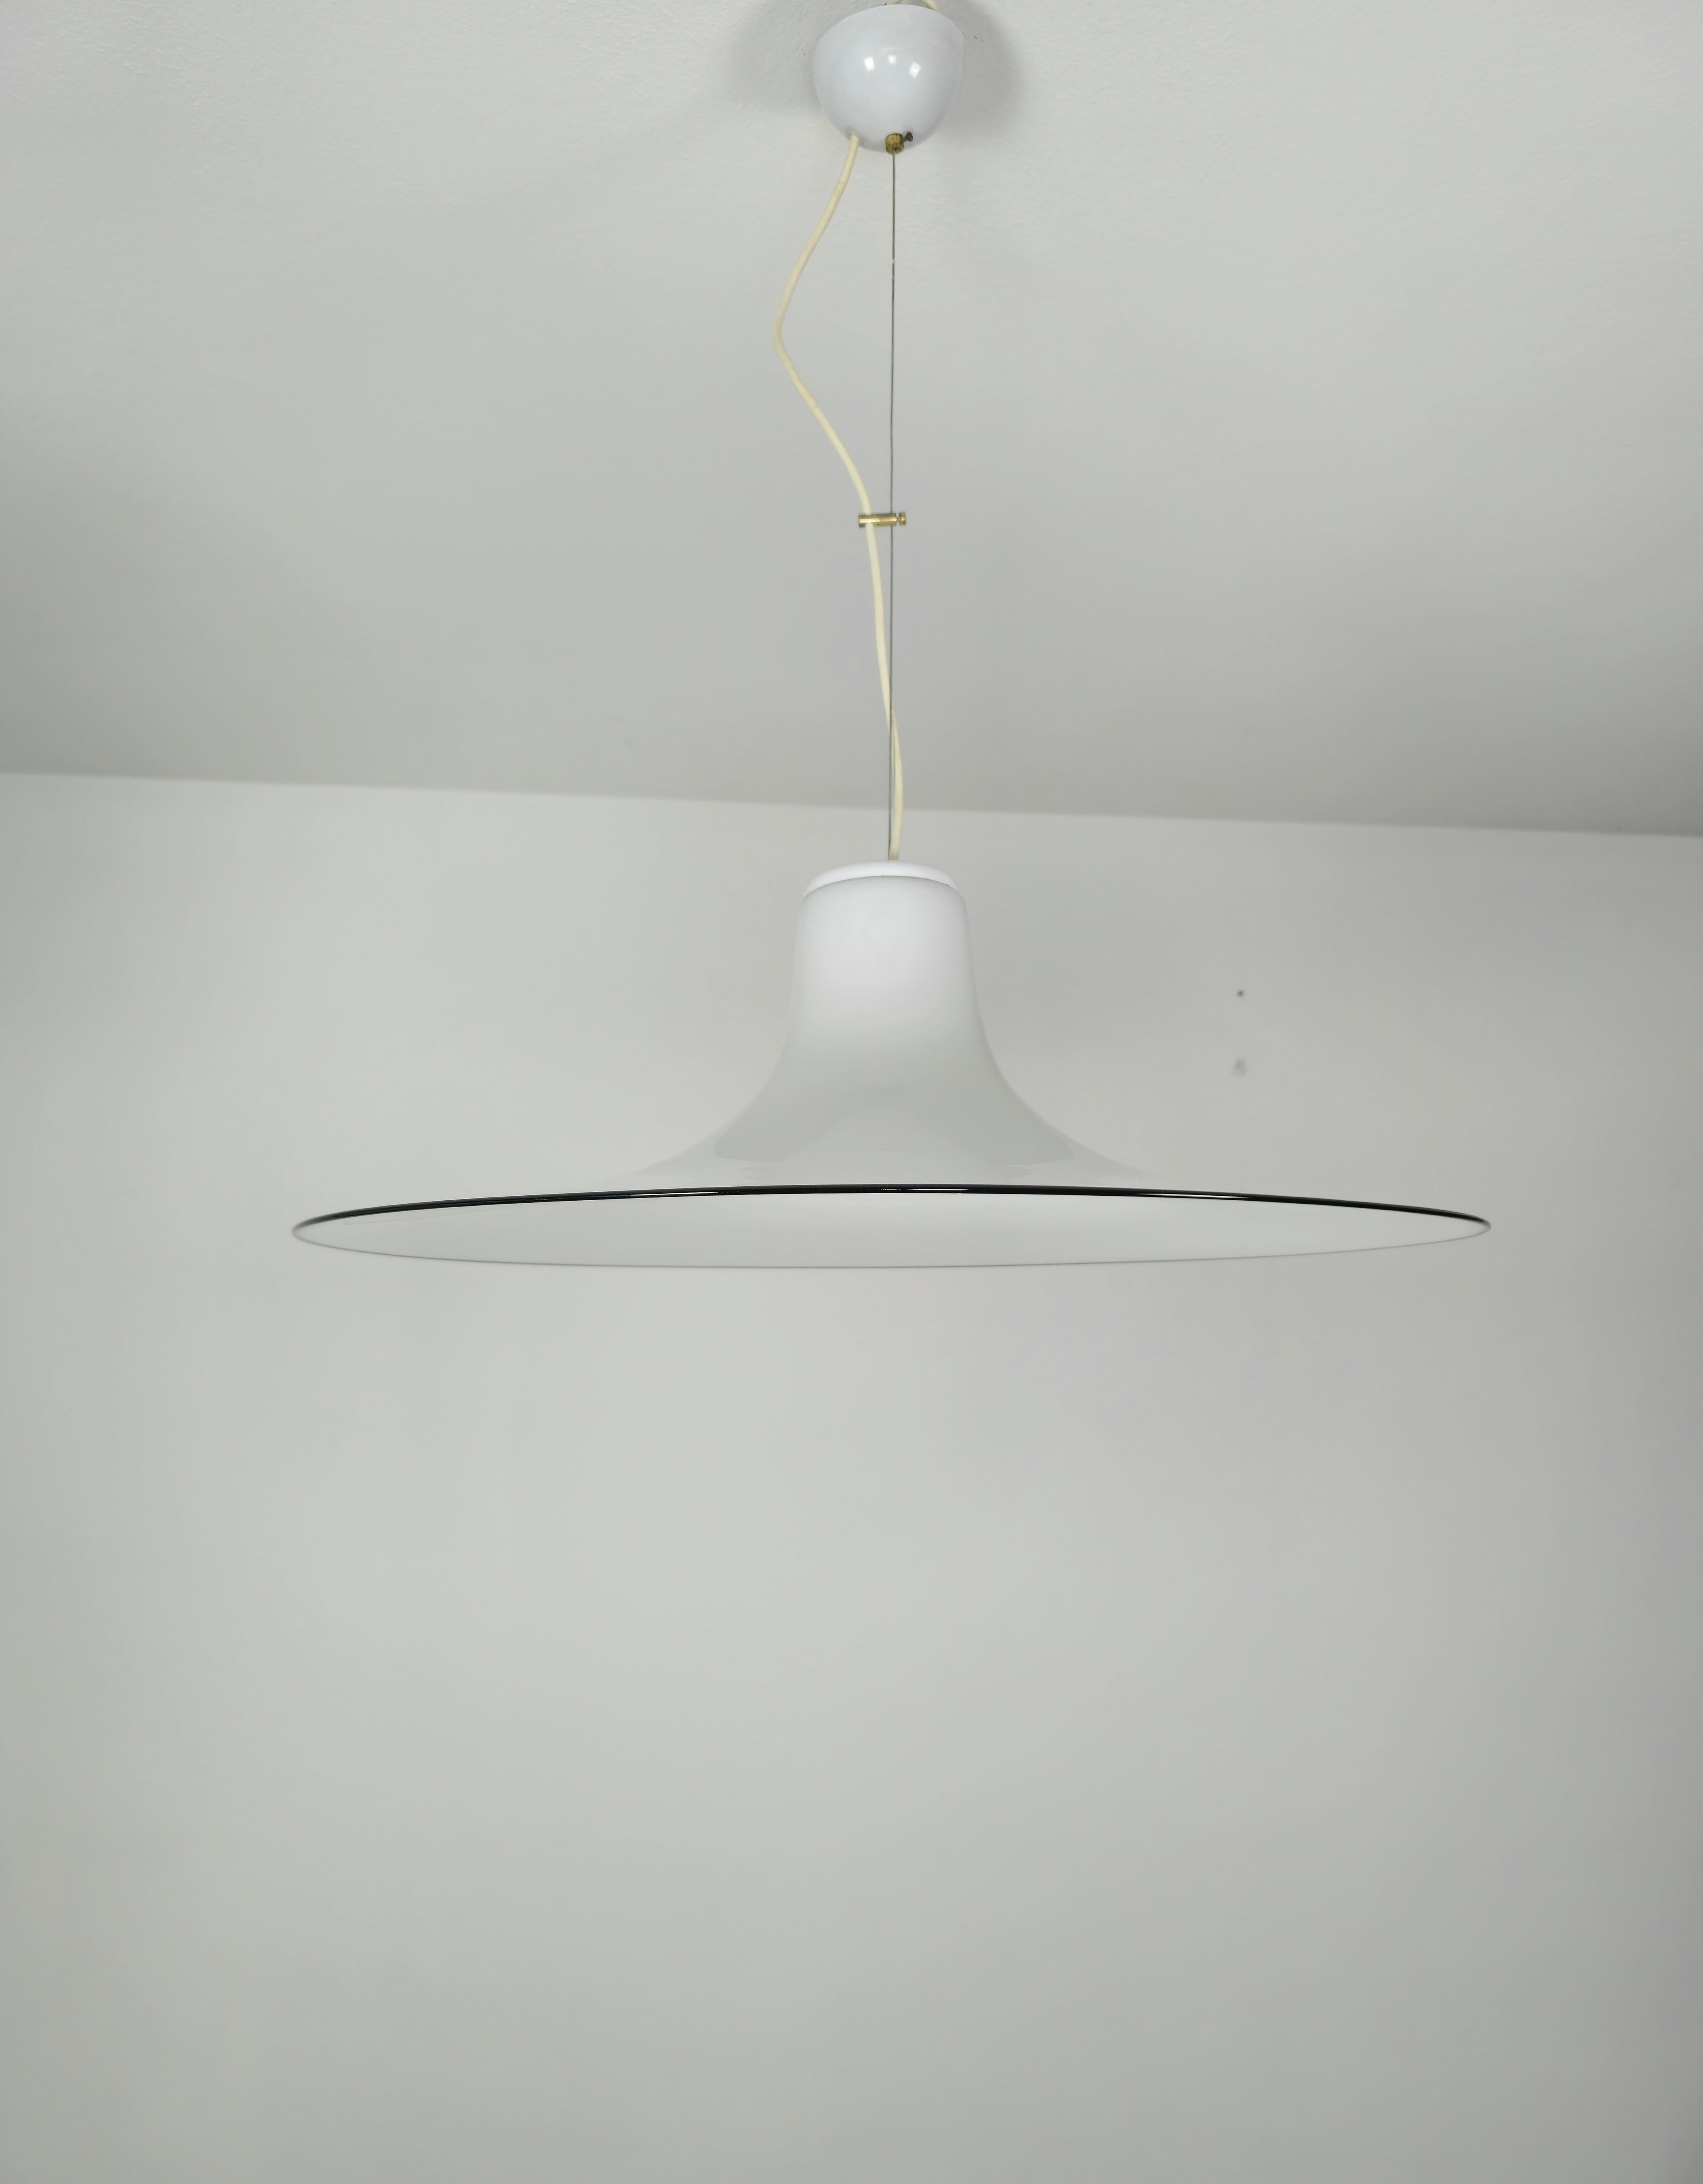 Suspension lamp with 1 E27 light attributed to Renato Toso for Leucos and produced in the 70s.
The pendant lamp in the shape of a 